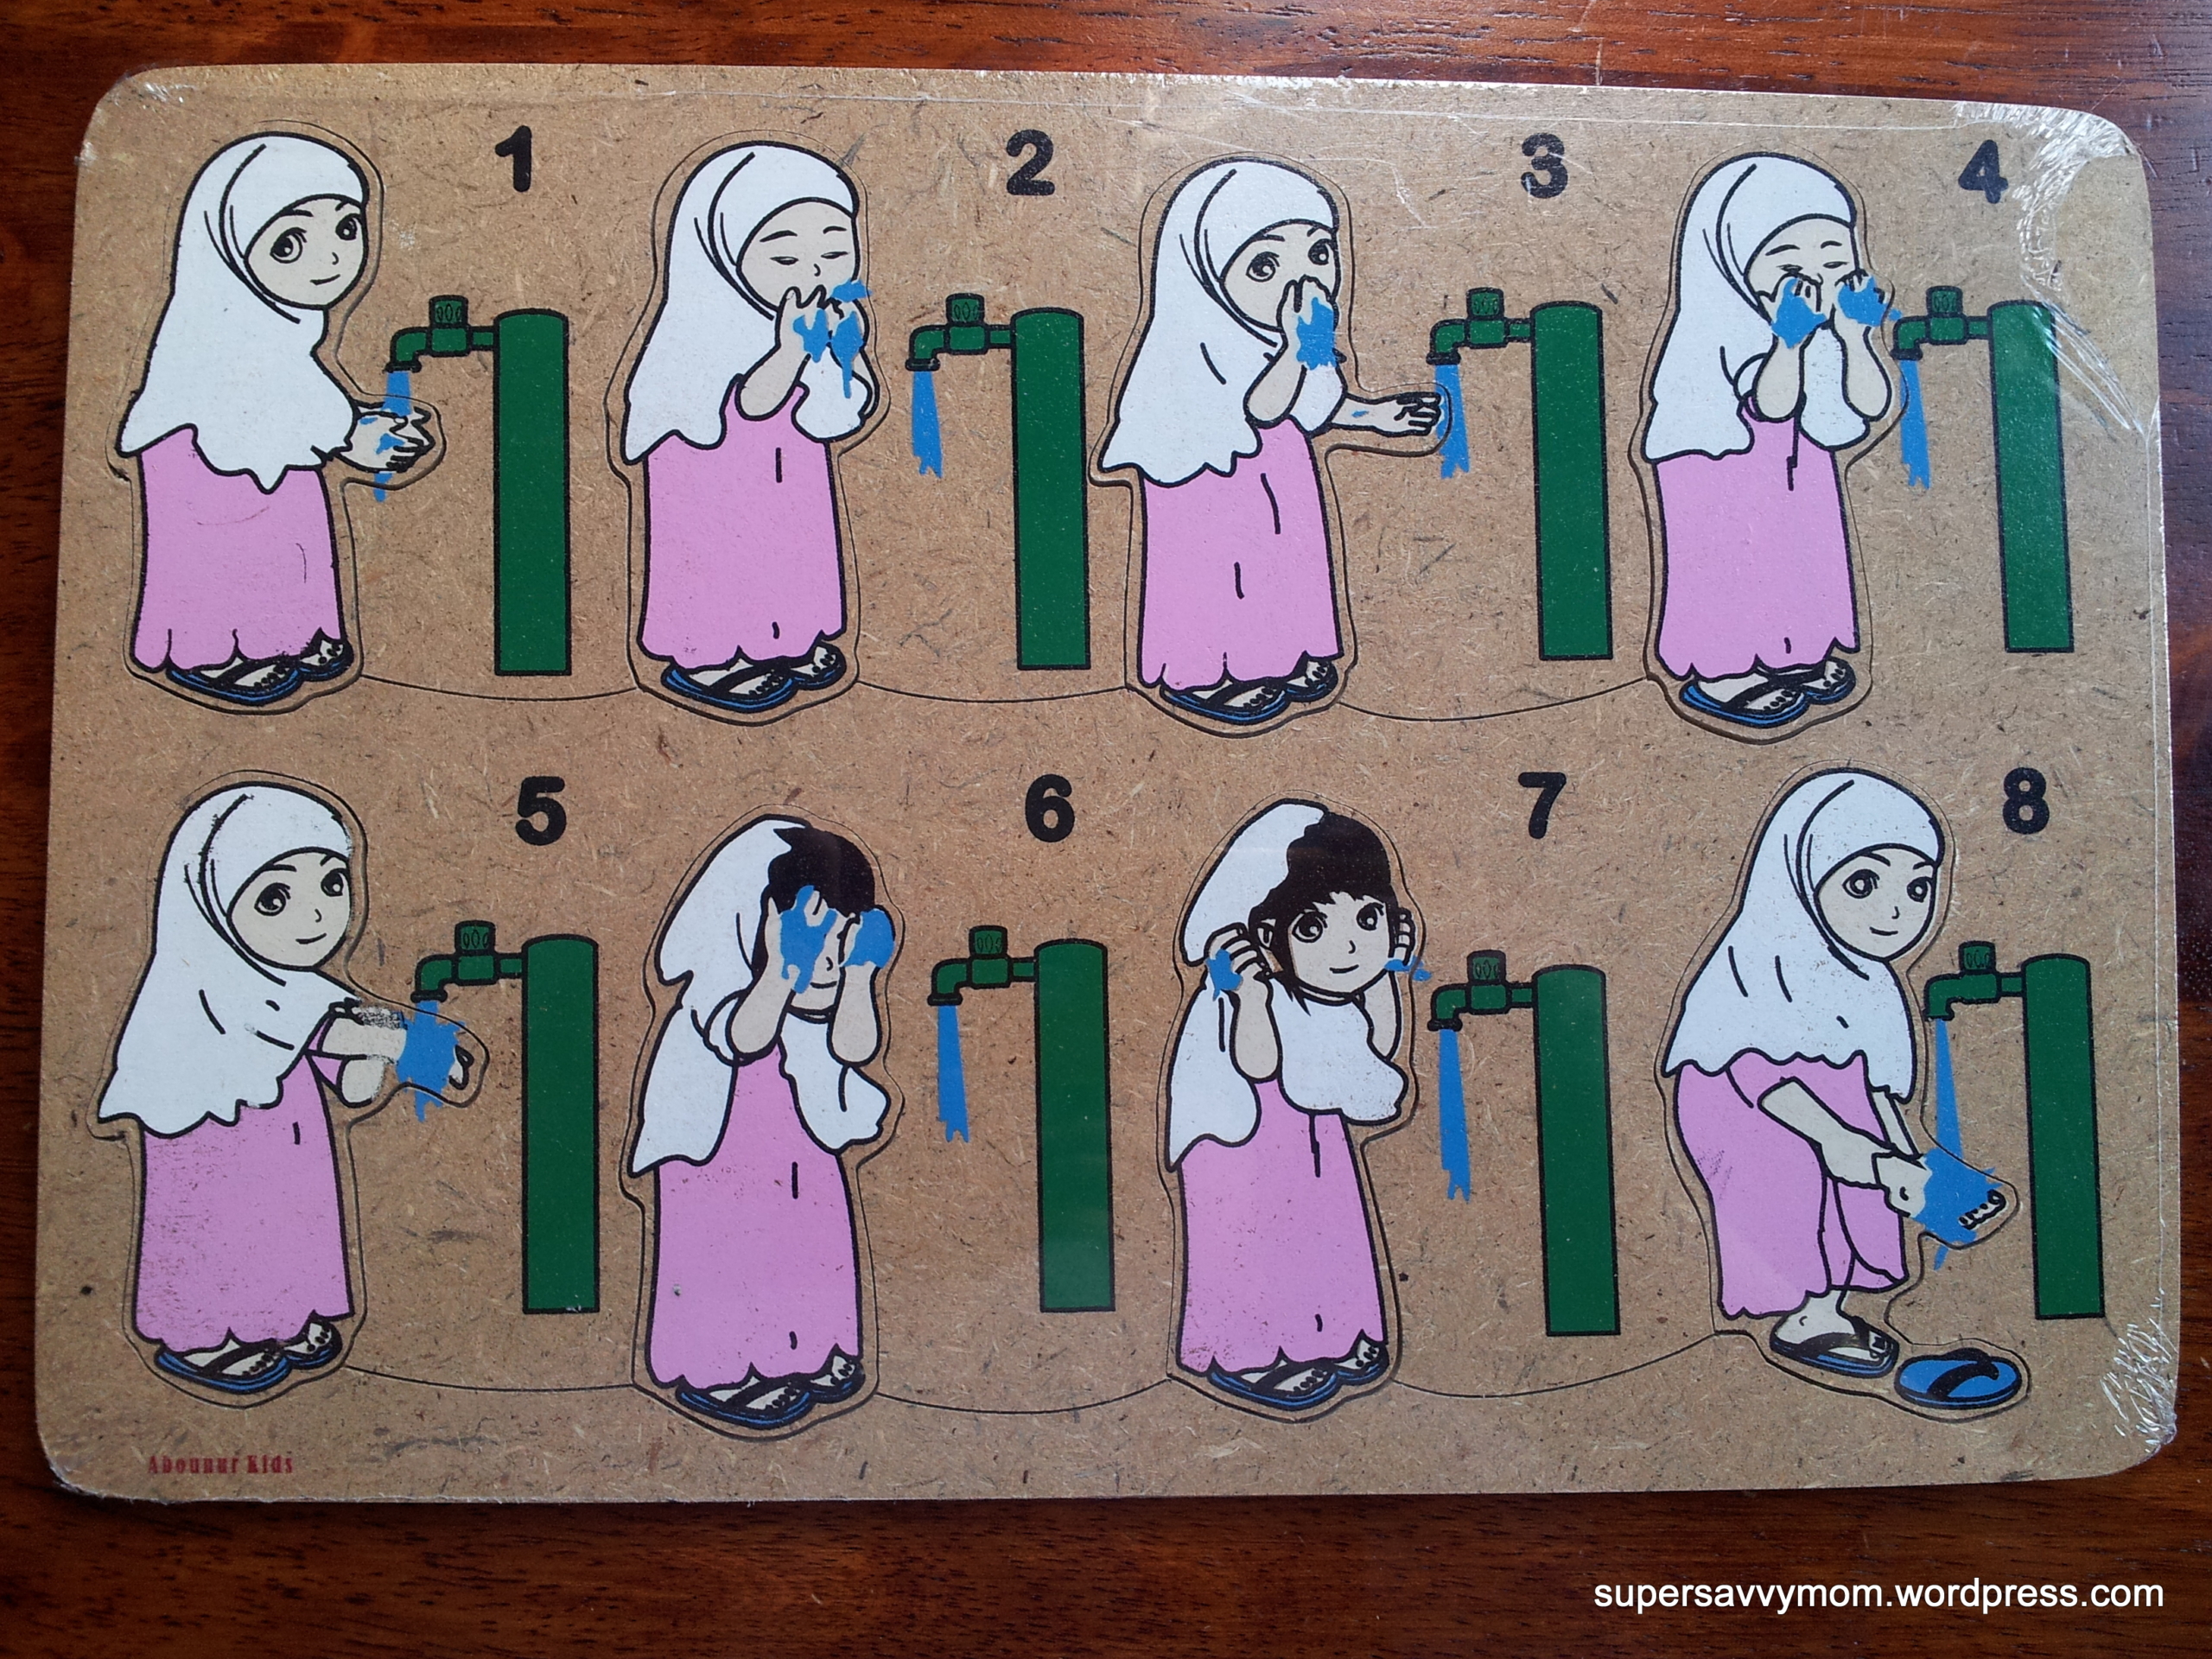 Step-by-Step Guide to Wudu: Teaching Kids How to Perform Ablution